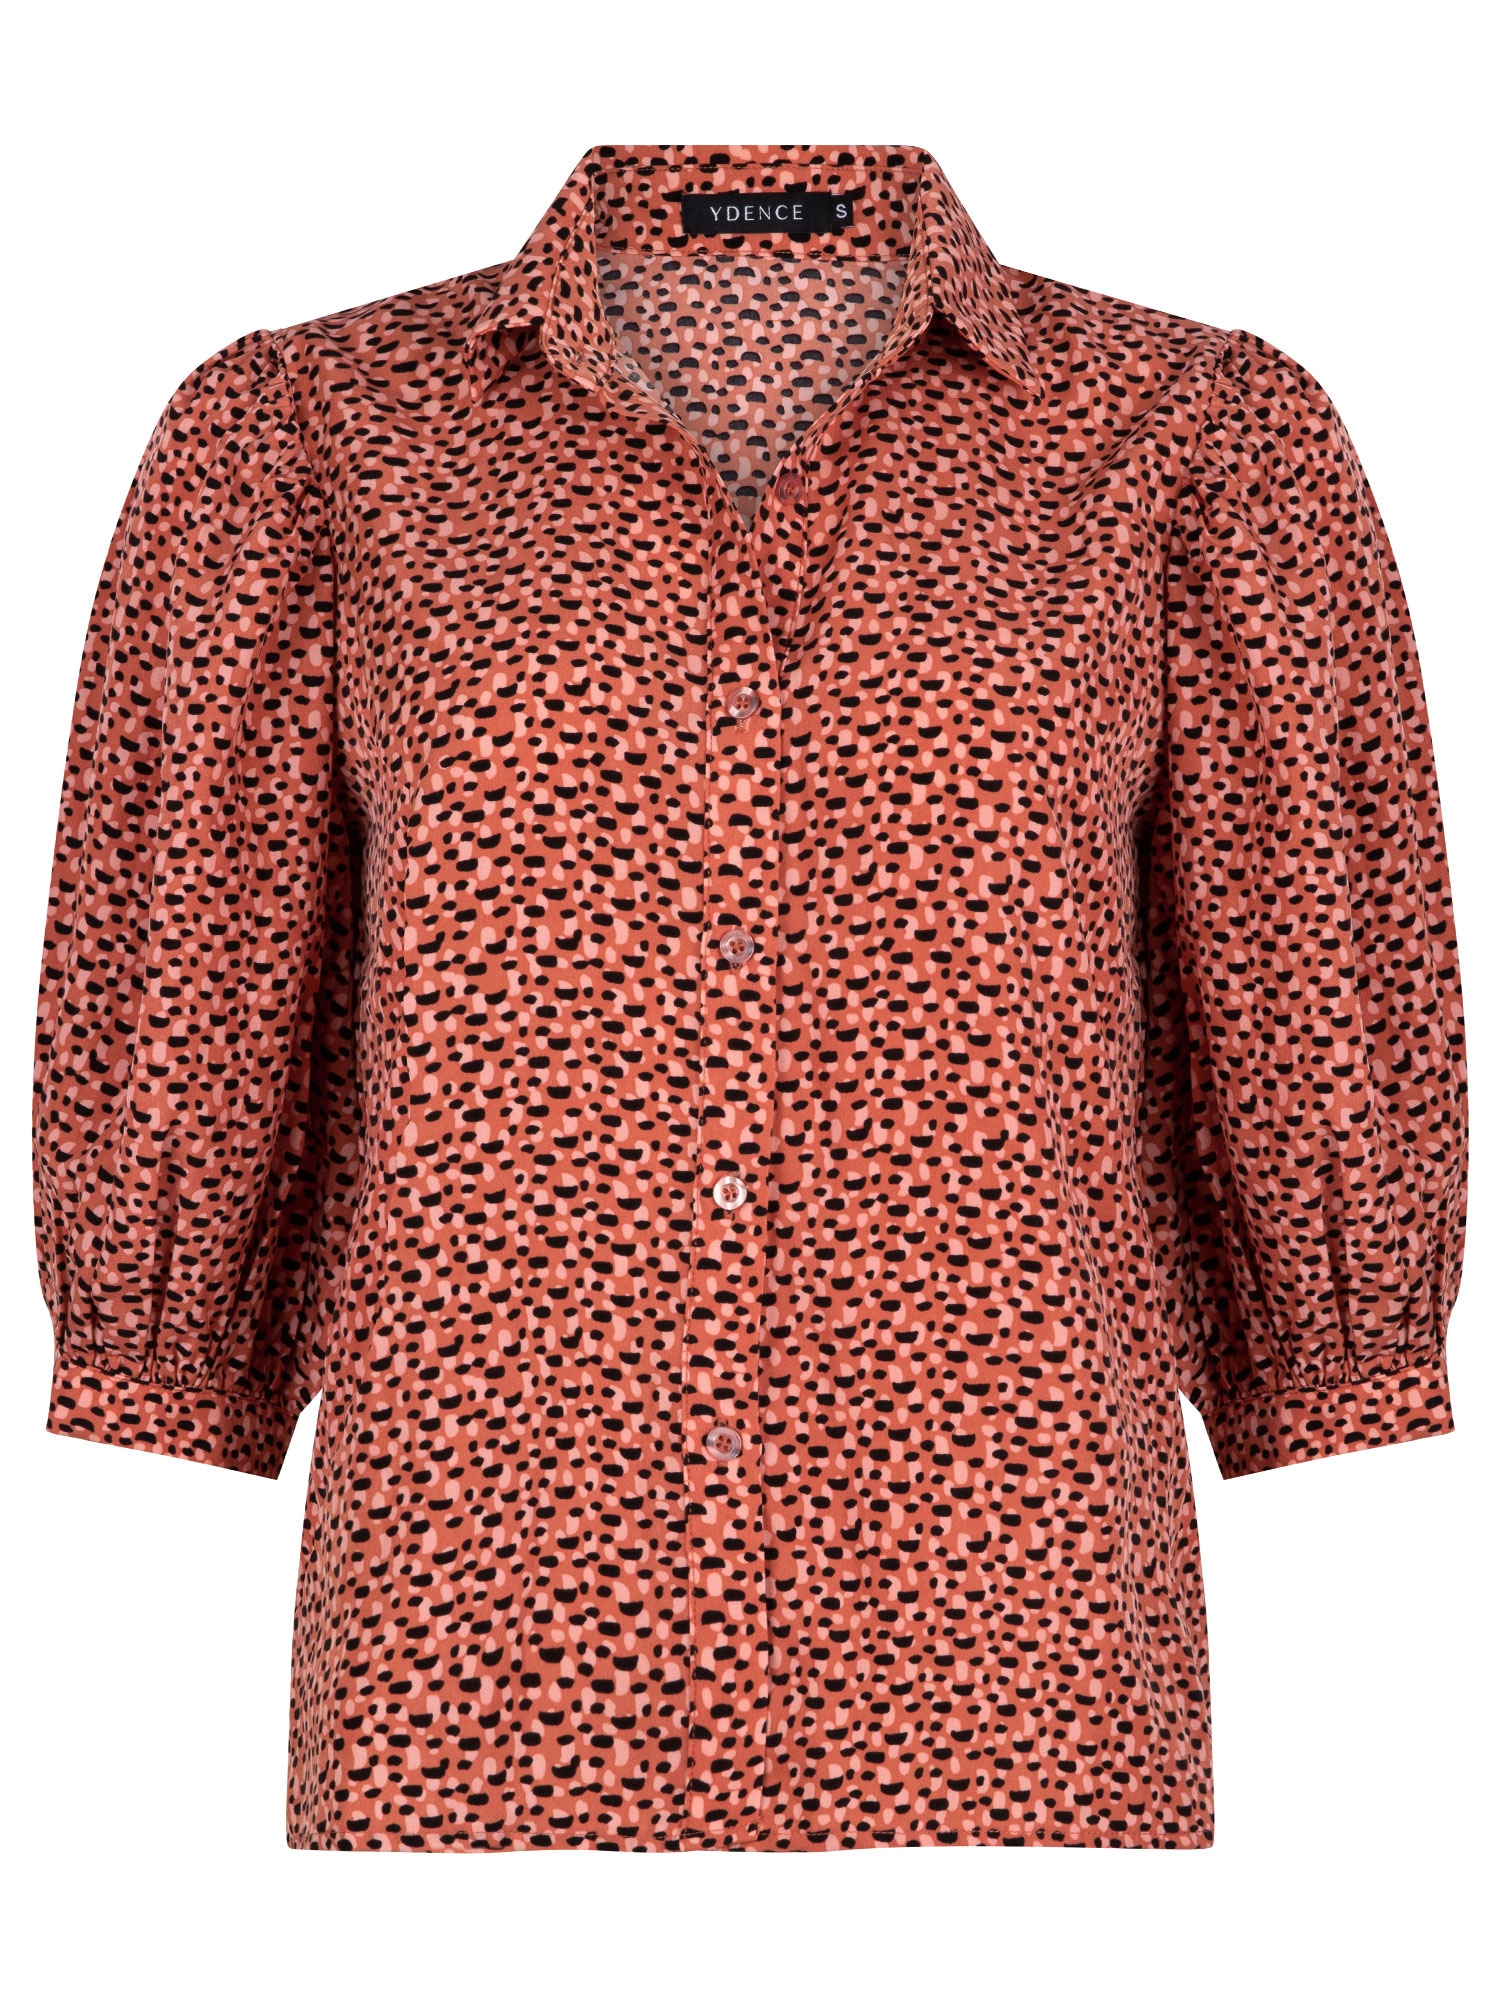 Ydence Blouse Sienna Dots print voorkant